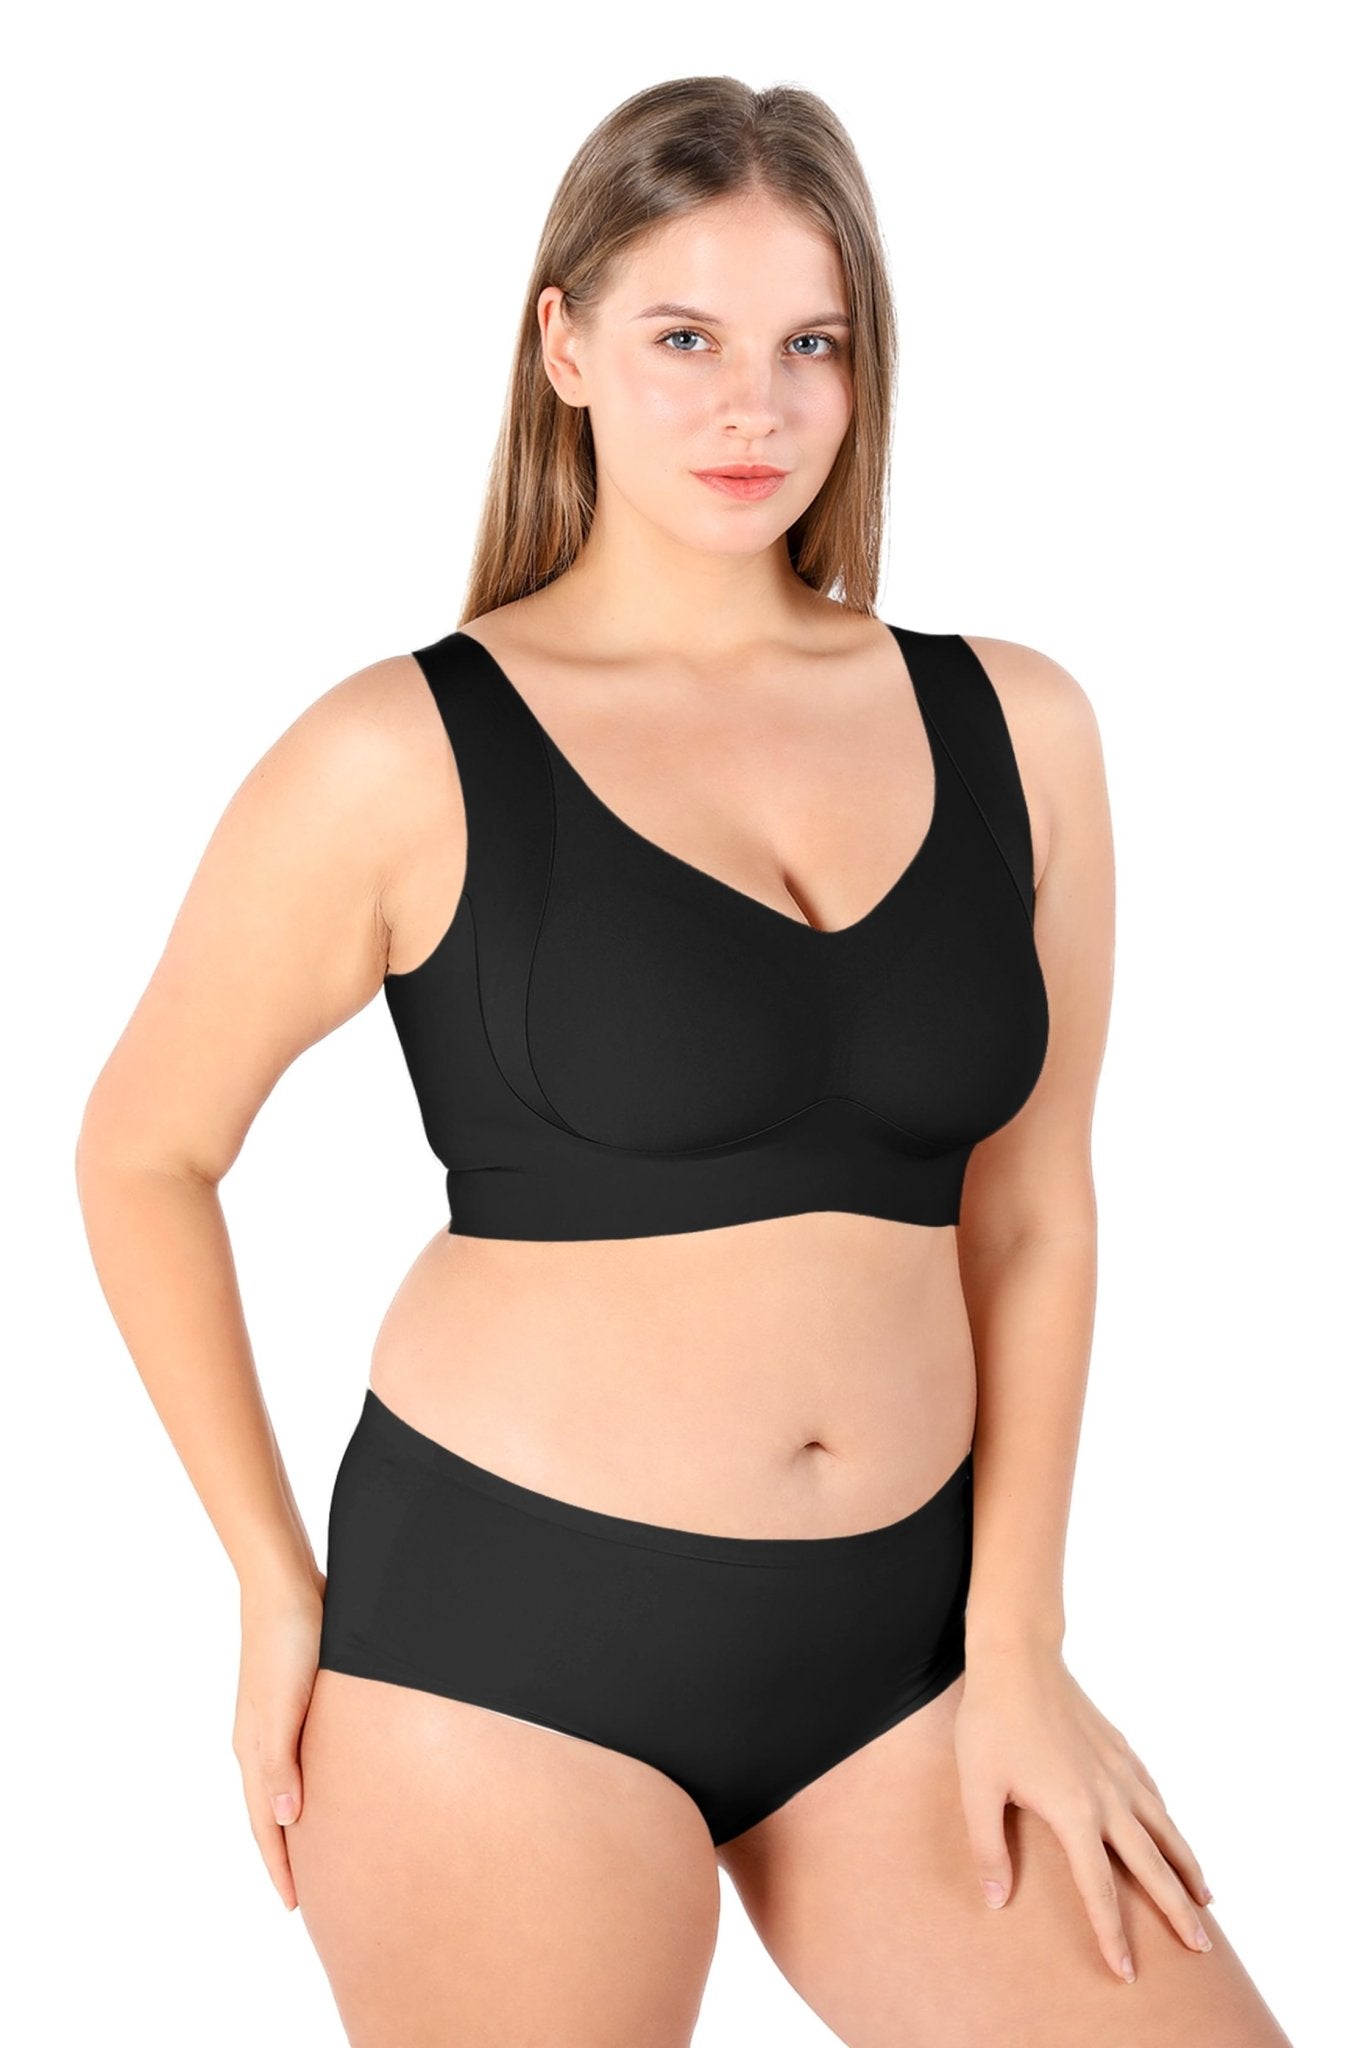 Easy Pieces™️ Max-Support Wire-Free Bra, Great For Large Breast - POSESHE